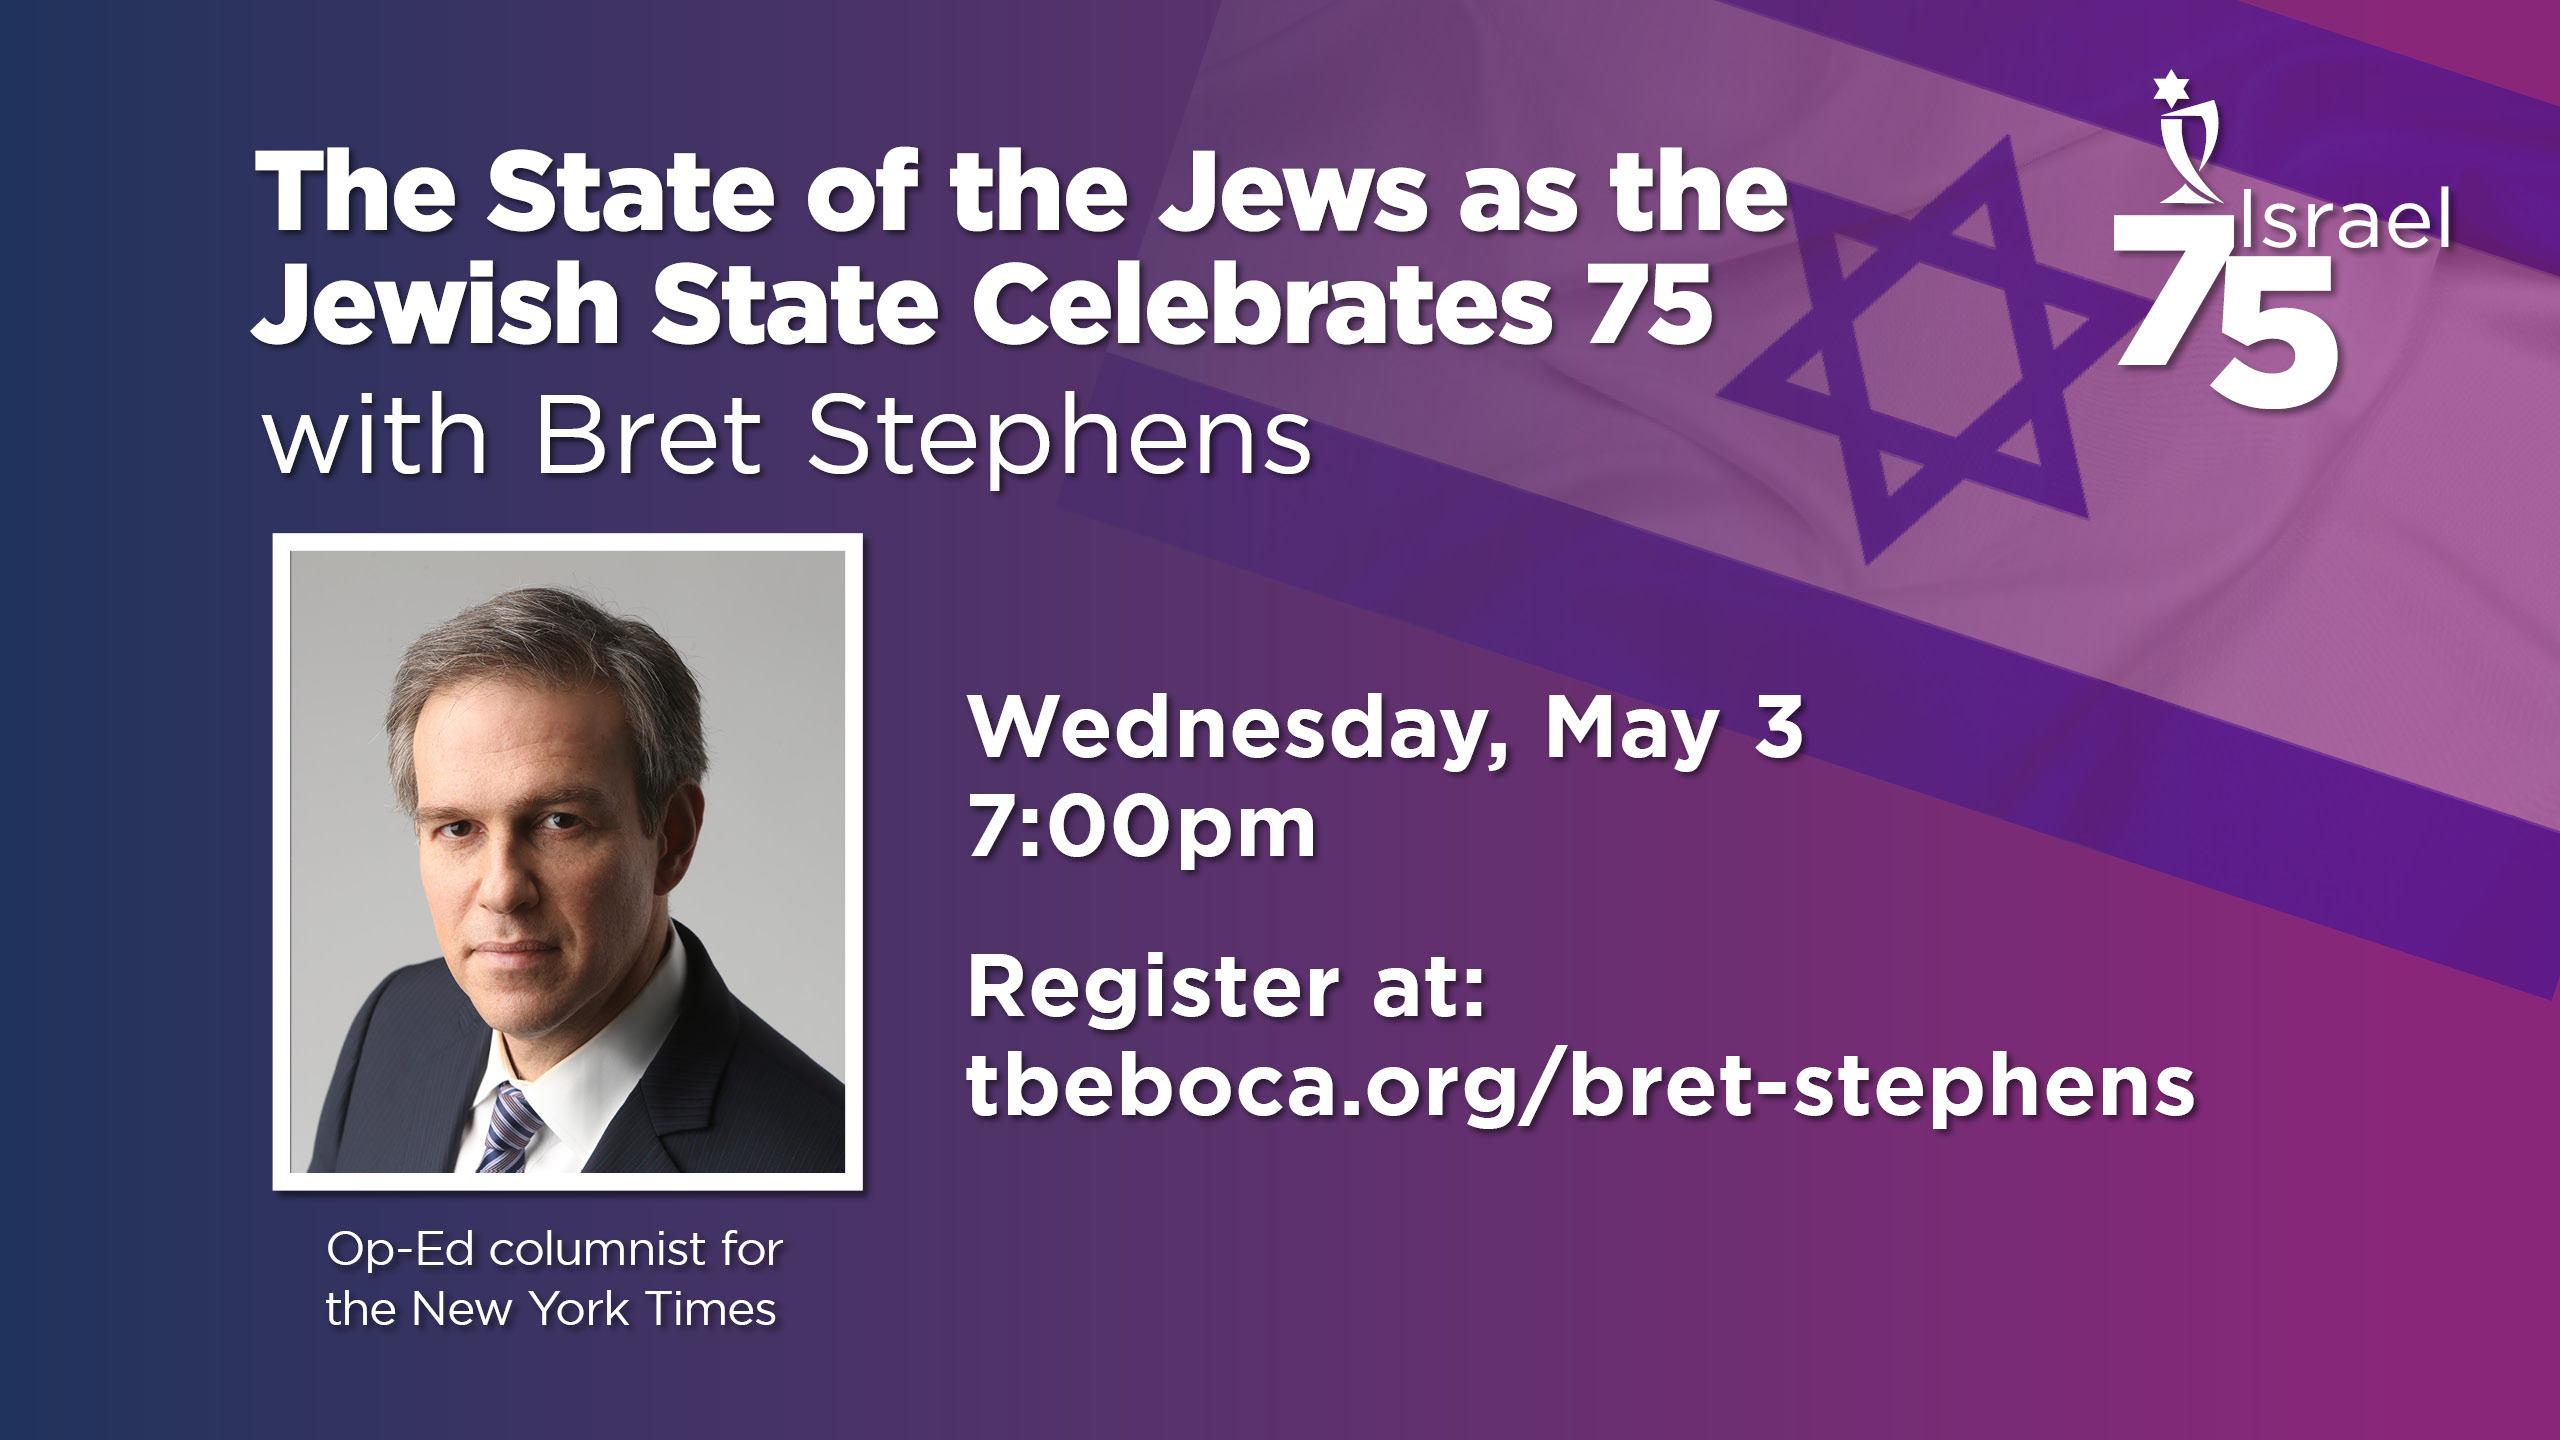 The State of the Jews as the Jewish State Celebrates 75 with Bret Stephens, event graphic with Temple Beth El of Boca Raton